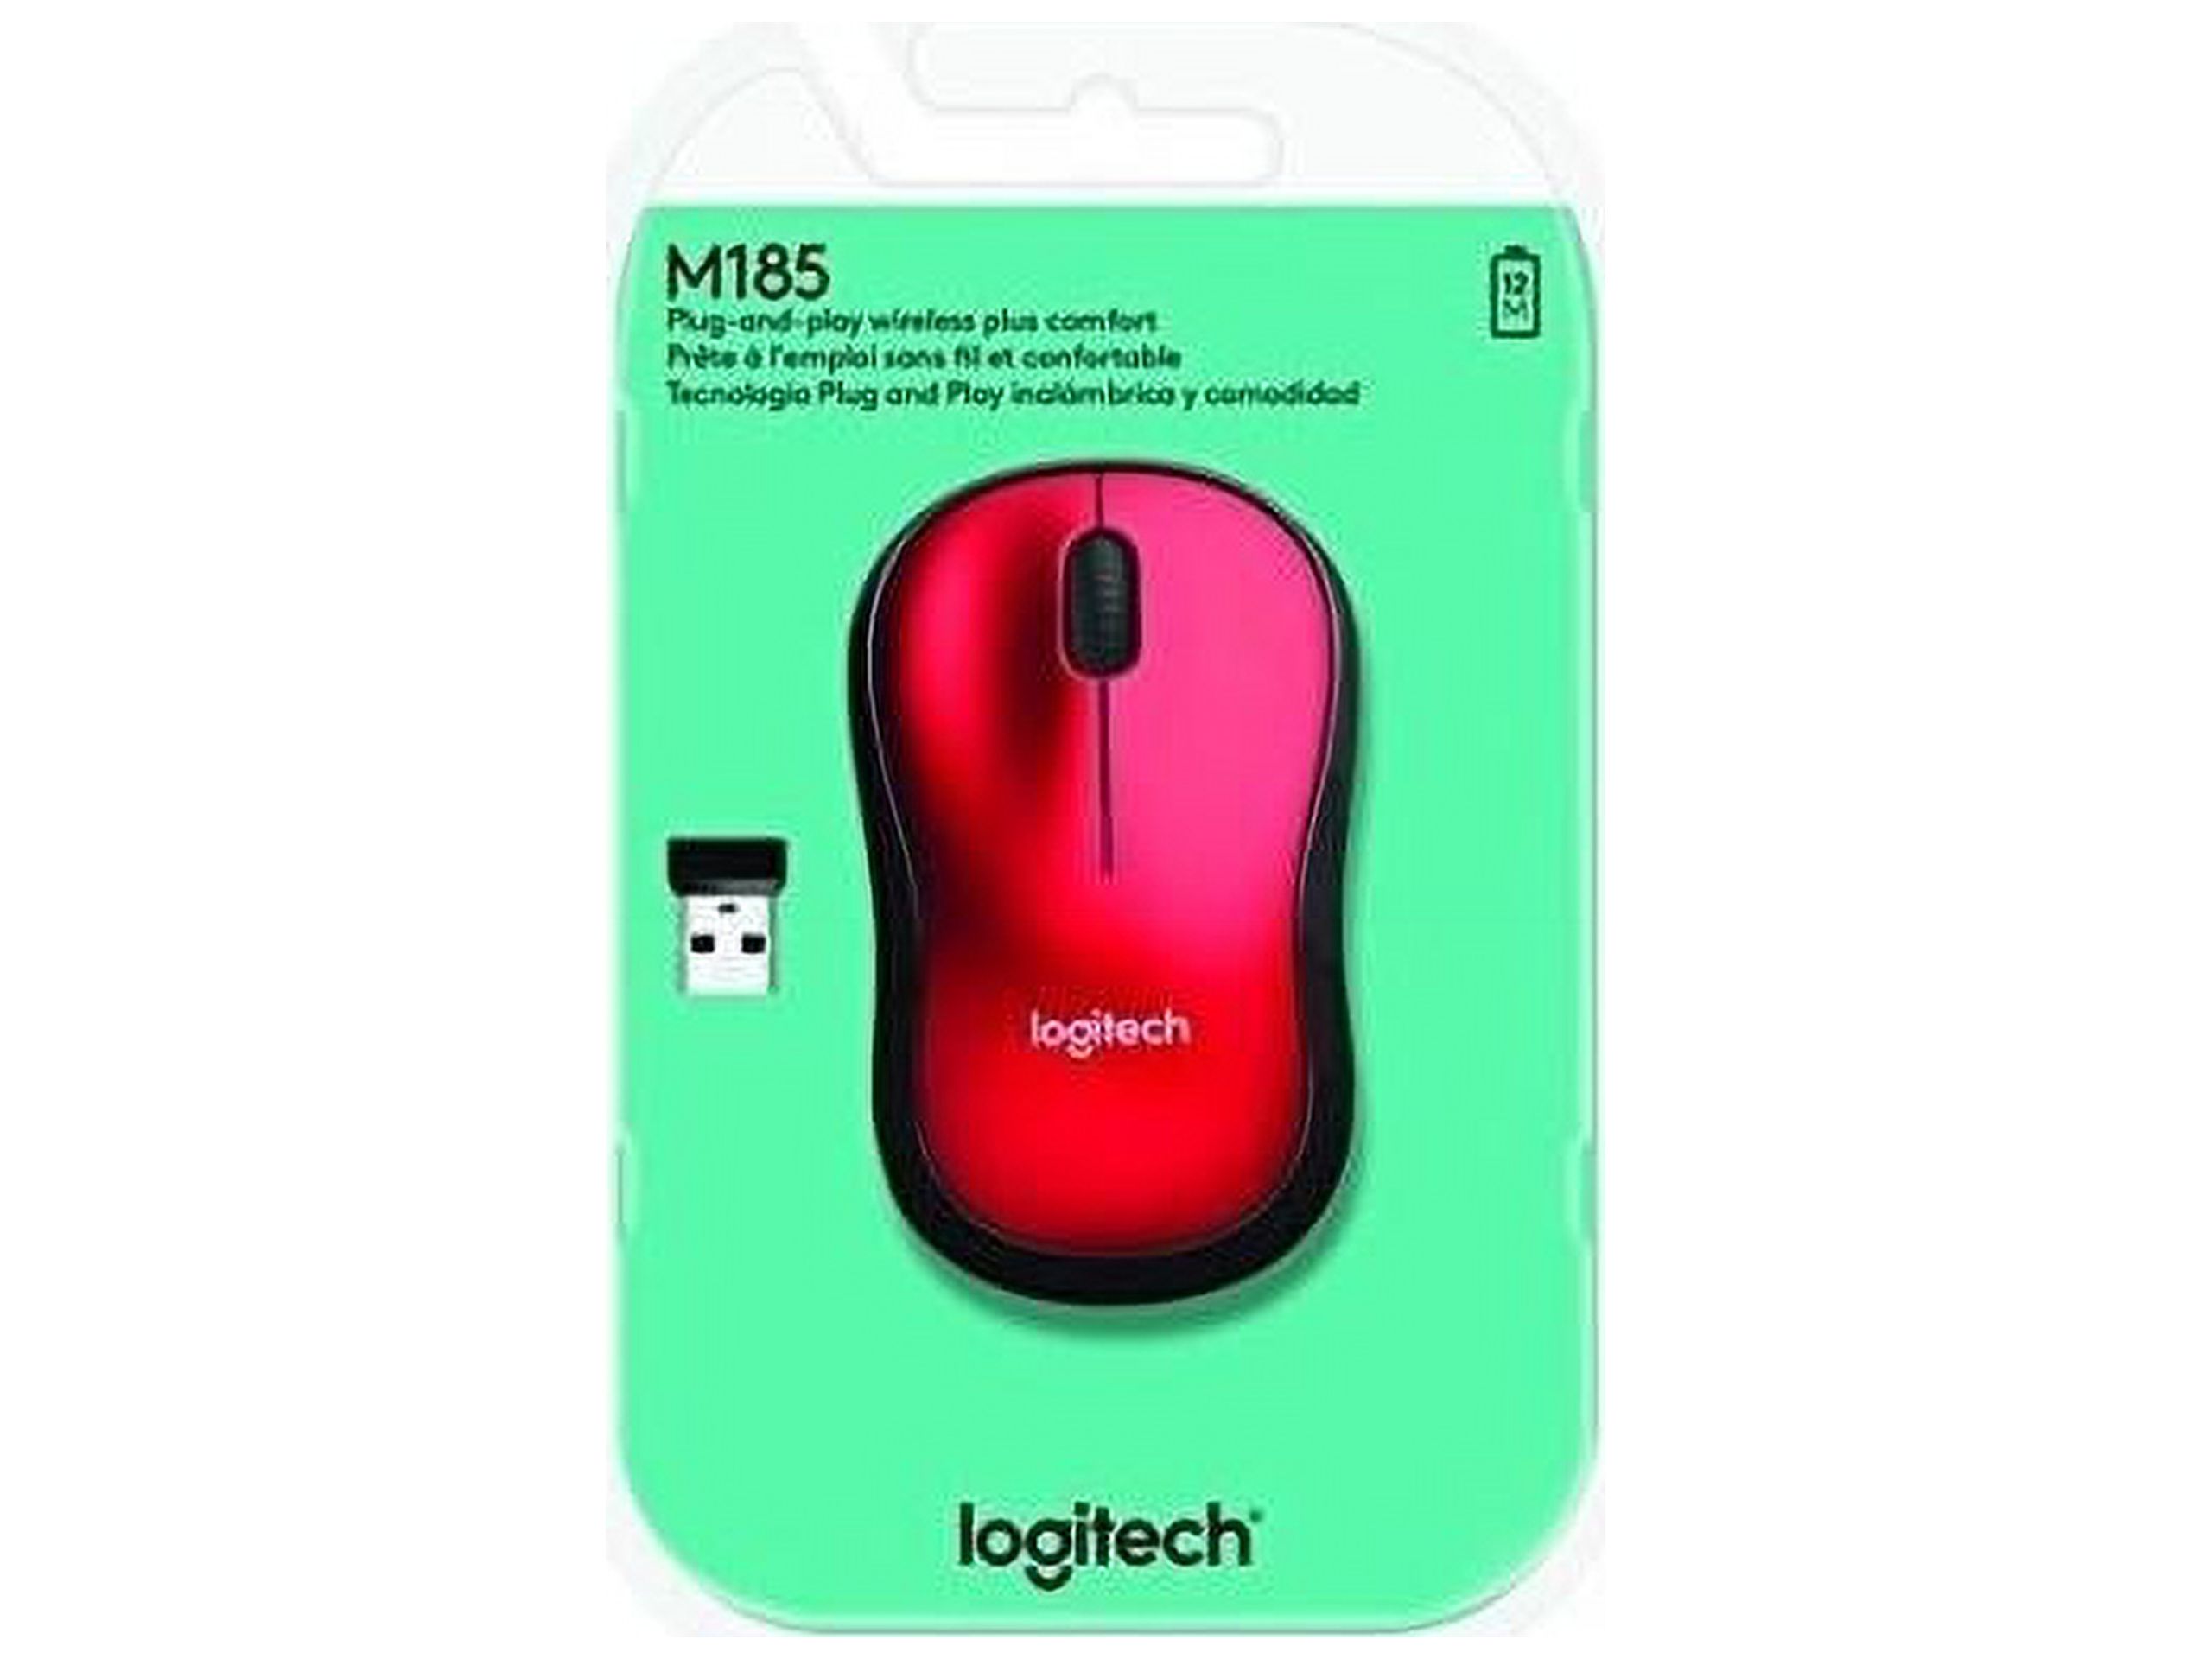 Logitech M185 Wireless Mouse, 2.4GHz with USB Mini Receiver, Ambidextrous, Red - image 2 of 15